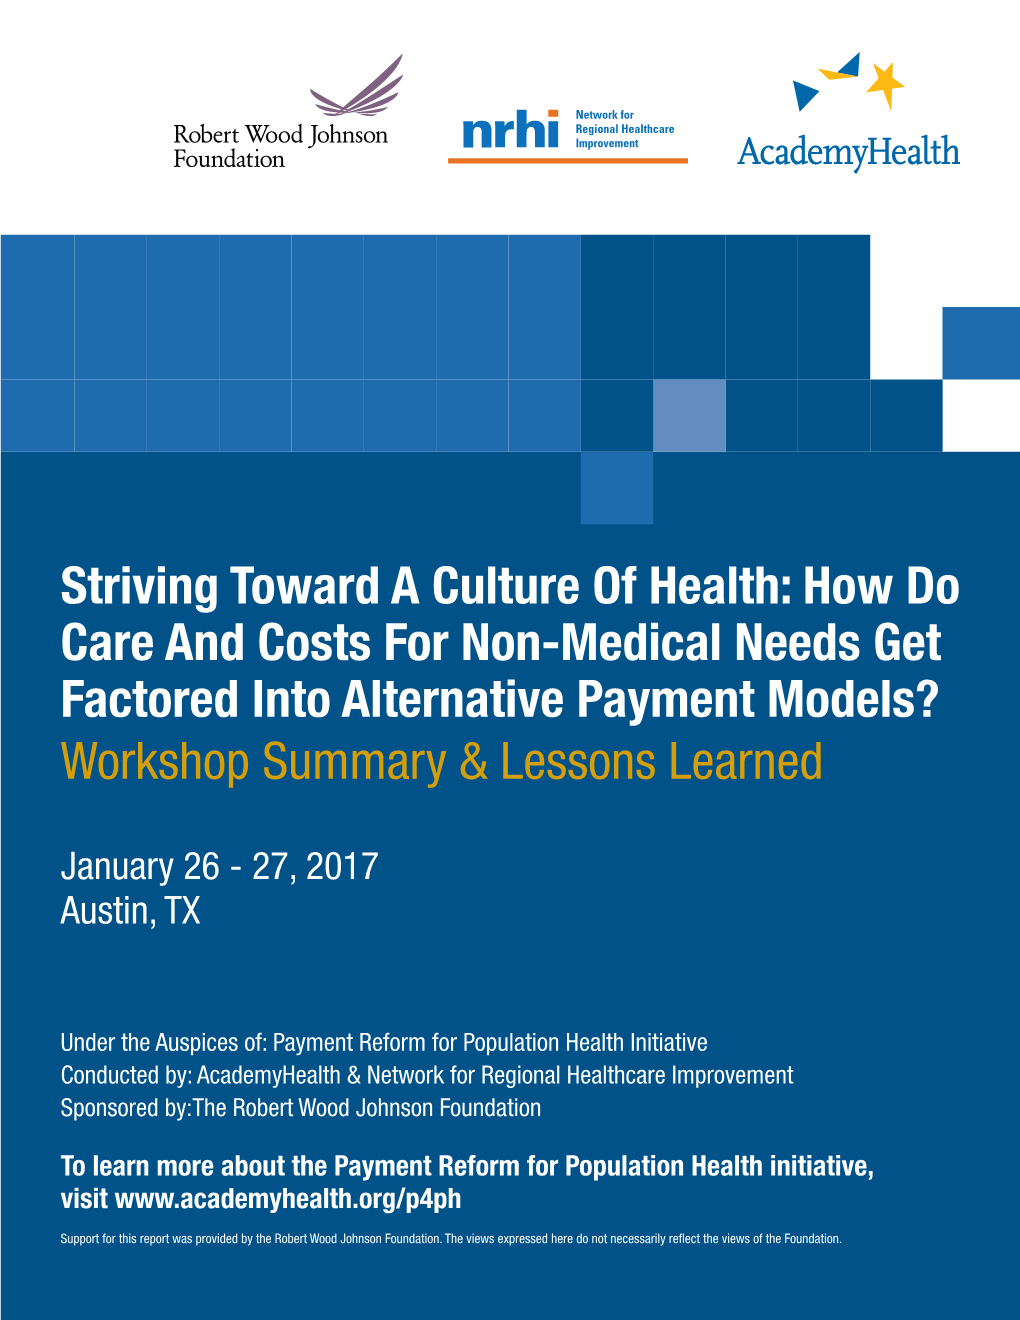 Striving Toward a Culture of Health: How Do Care and Costs for Non-Medical Needs Get Factored Into Alternative Payment Models? Workshop Summary & Lessons Learned